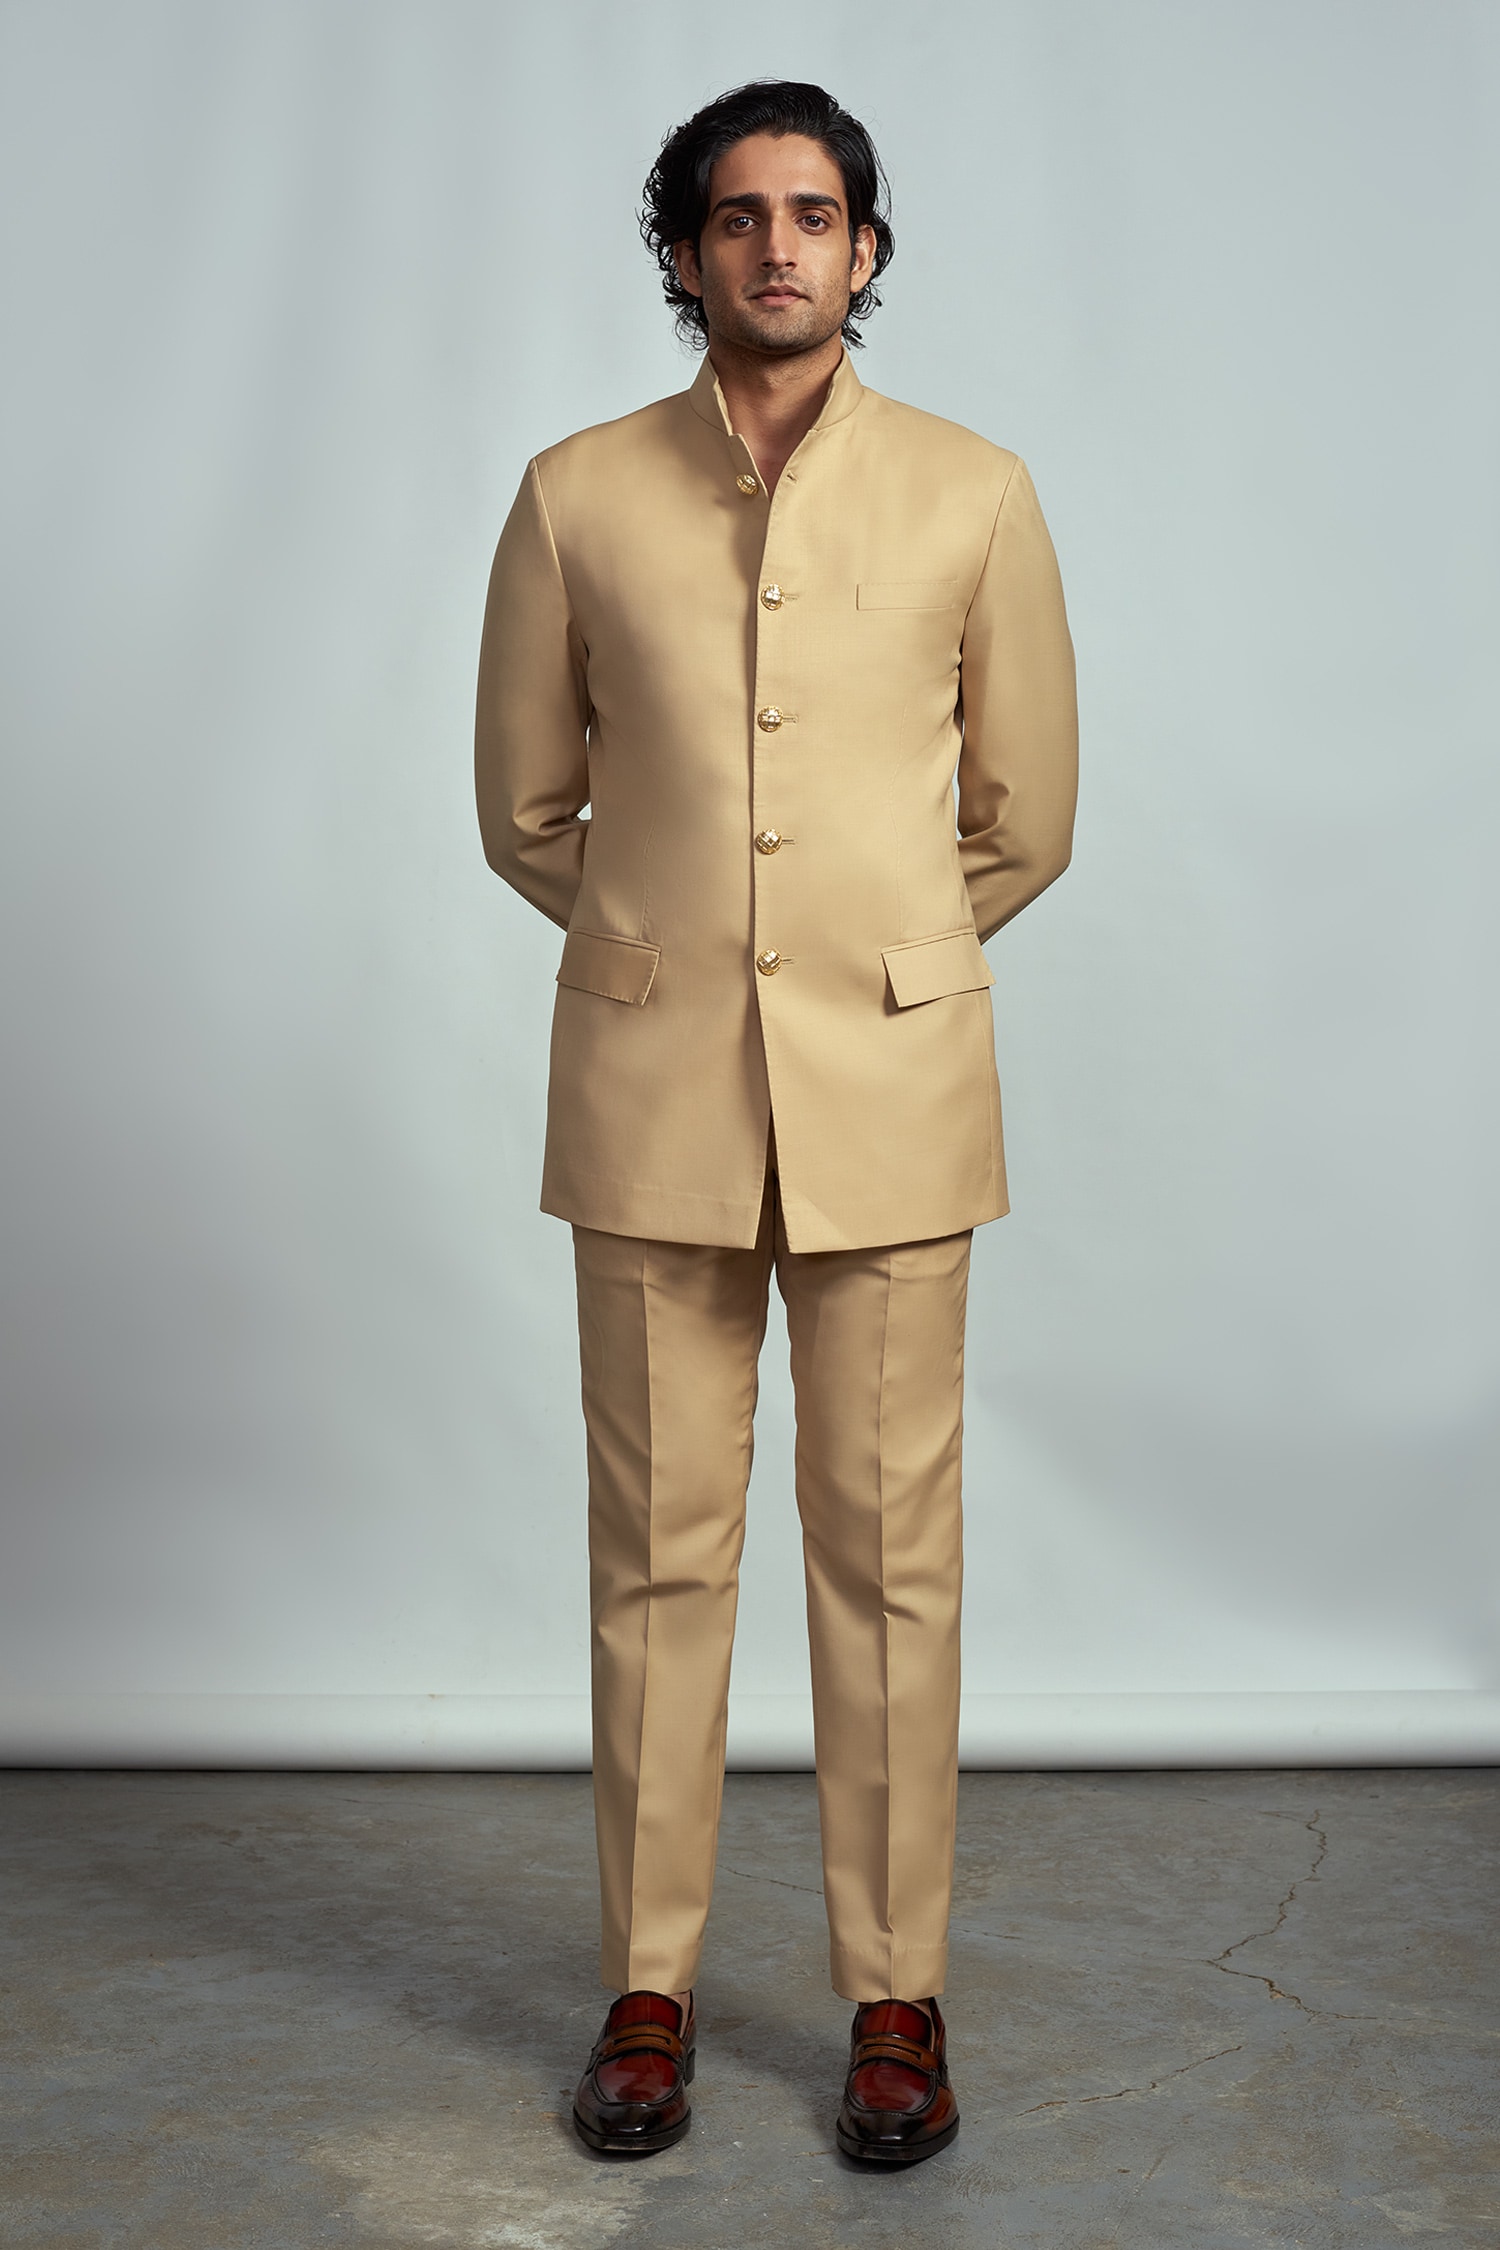 SVEN SUITS | Beige Terry Rayon Bandhgala Jacket Set | Pernia's Pop-Up Shop  Men | Fashion suits for men, Jodhpuri suits for men, Mens suits